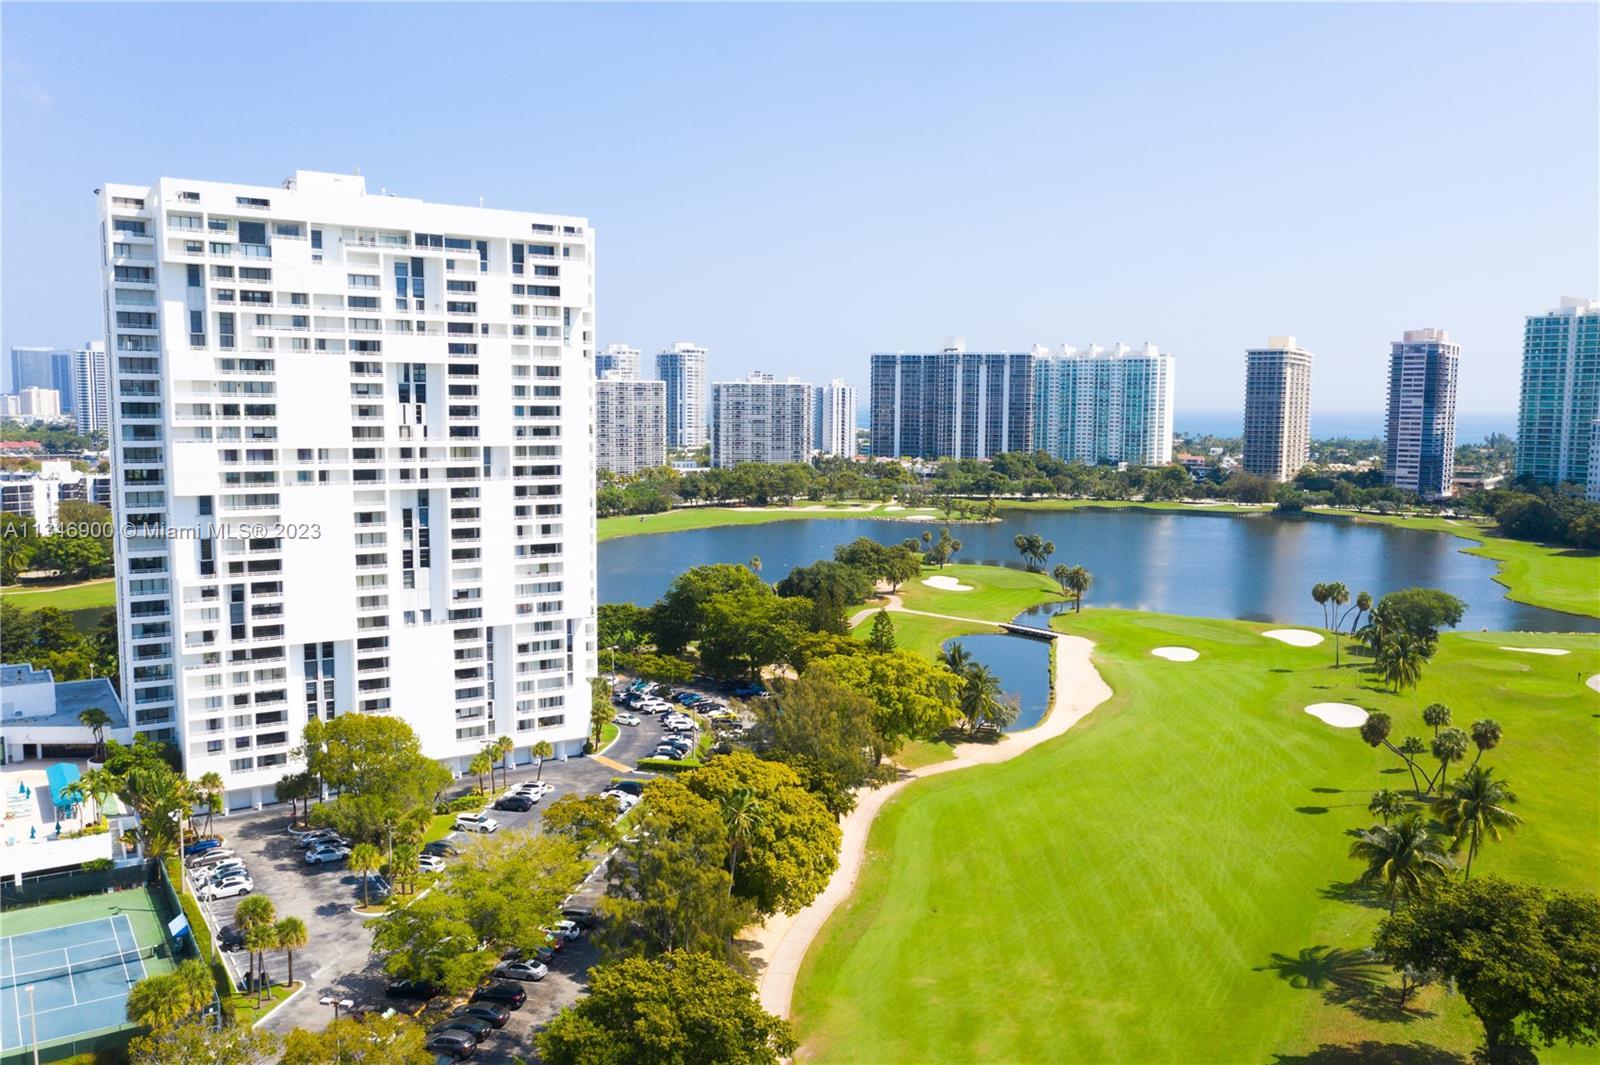 SPECTACULAR GOLF COURSE, INTRACOASTAL, AND PARTIAL OCEAN VIEWS! THIS SPACIOUS AND BRIGHT 2 BEDROOM, 